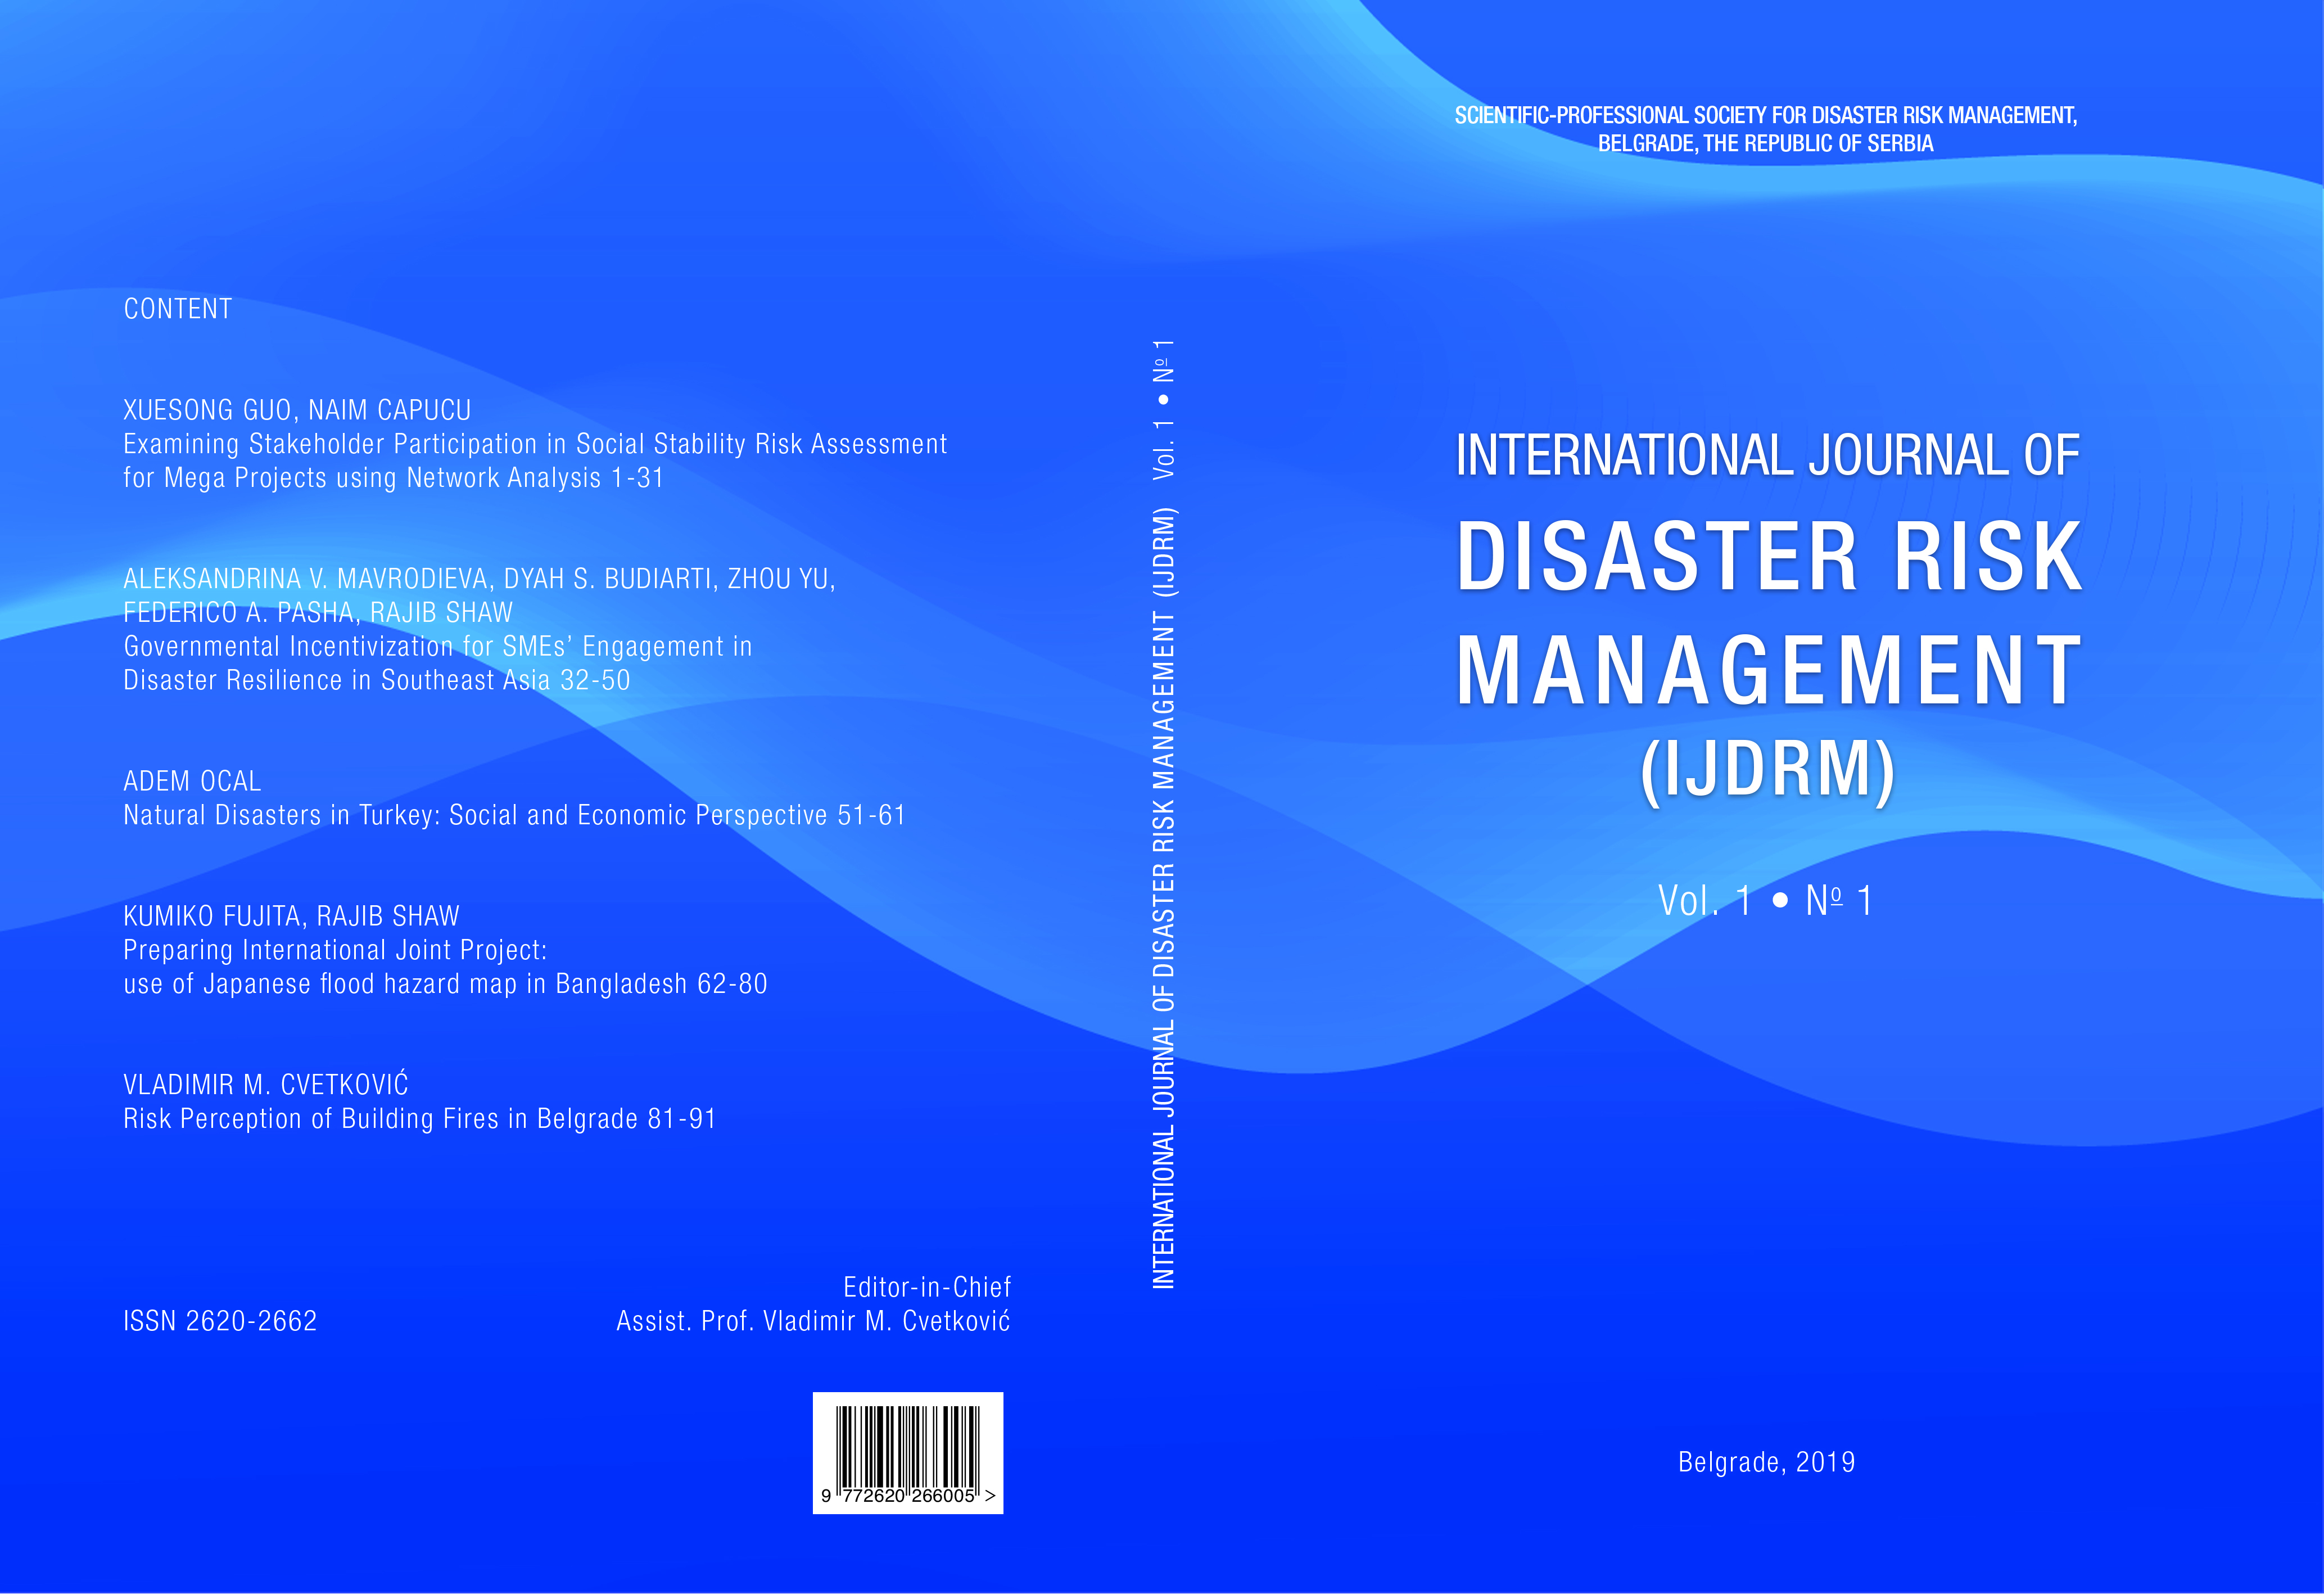 Natural Disasters in Turkey: Social and Economic Perspective